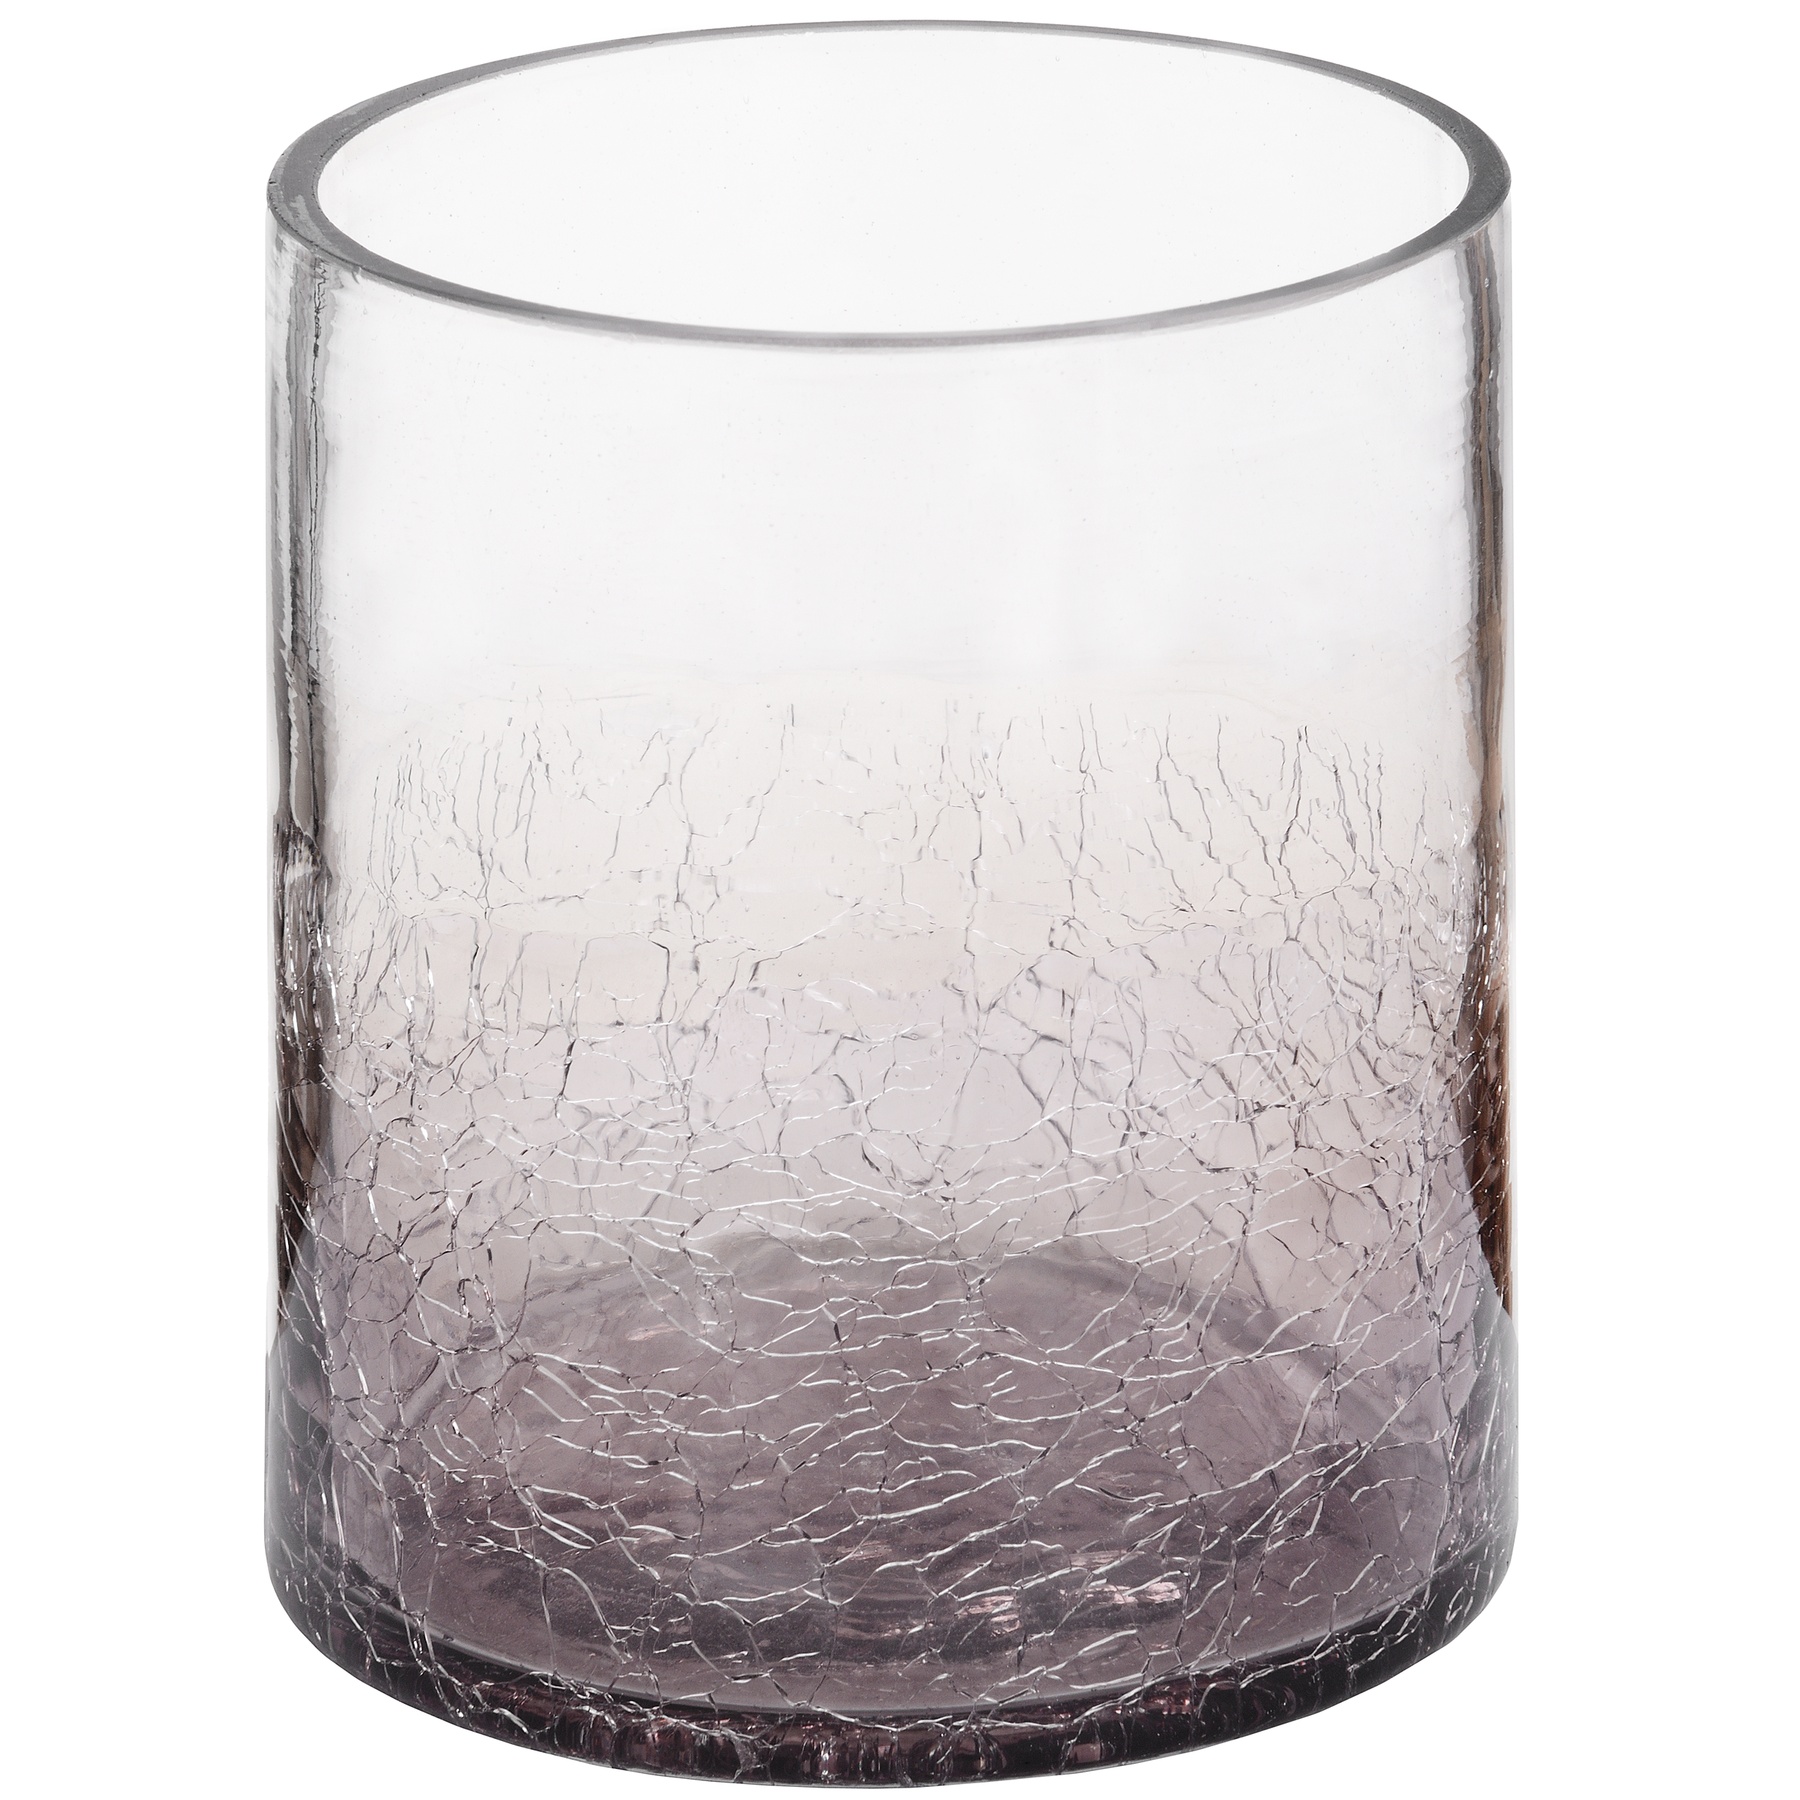 Small Smoked Crackle Effect Candle Holder - Image 4